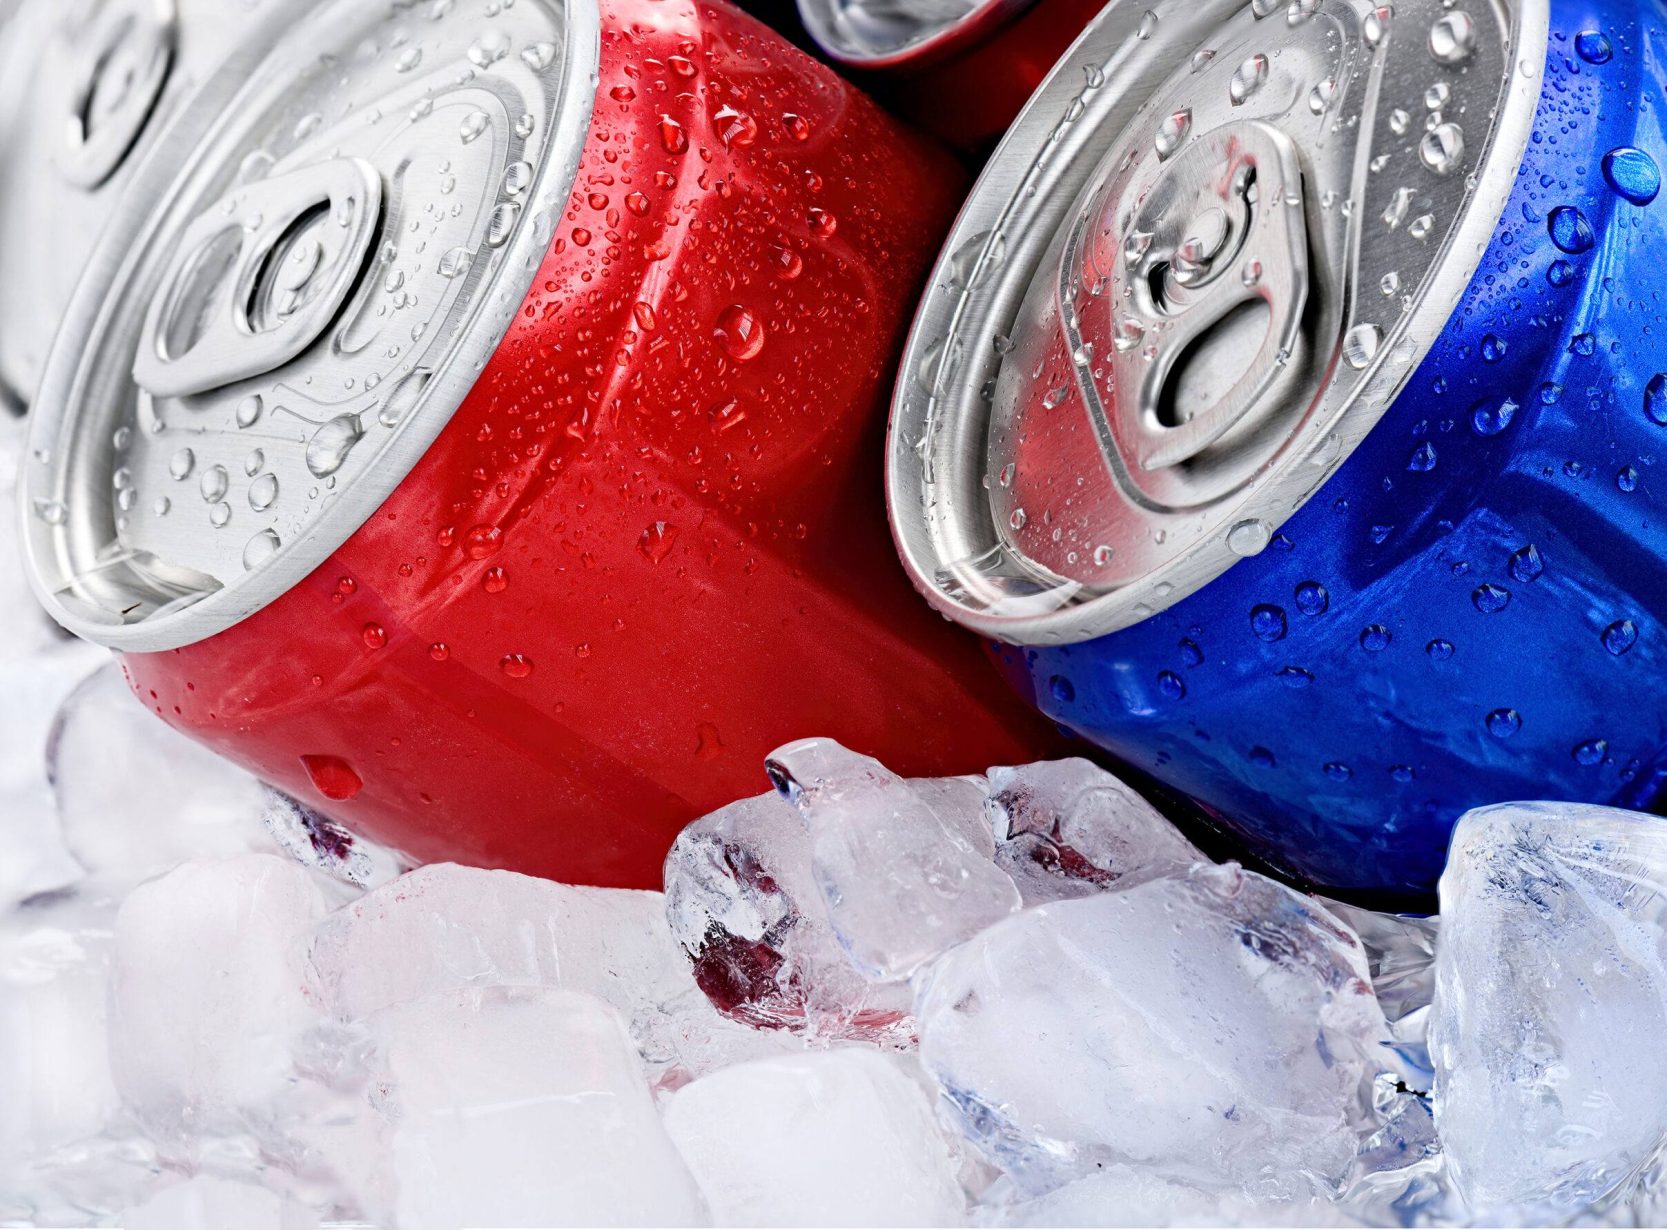 Cans of drink on crushed ice. Red and blue cans with droplets close-up macro